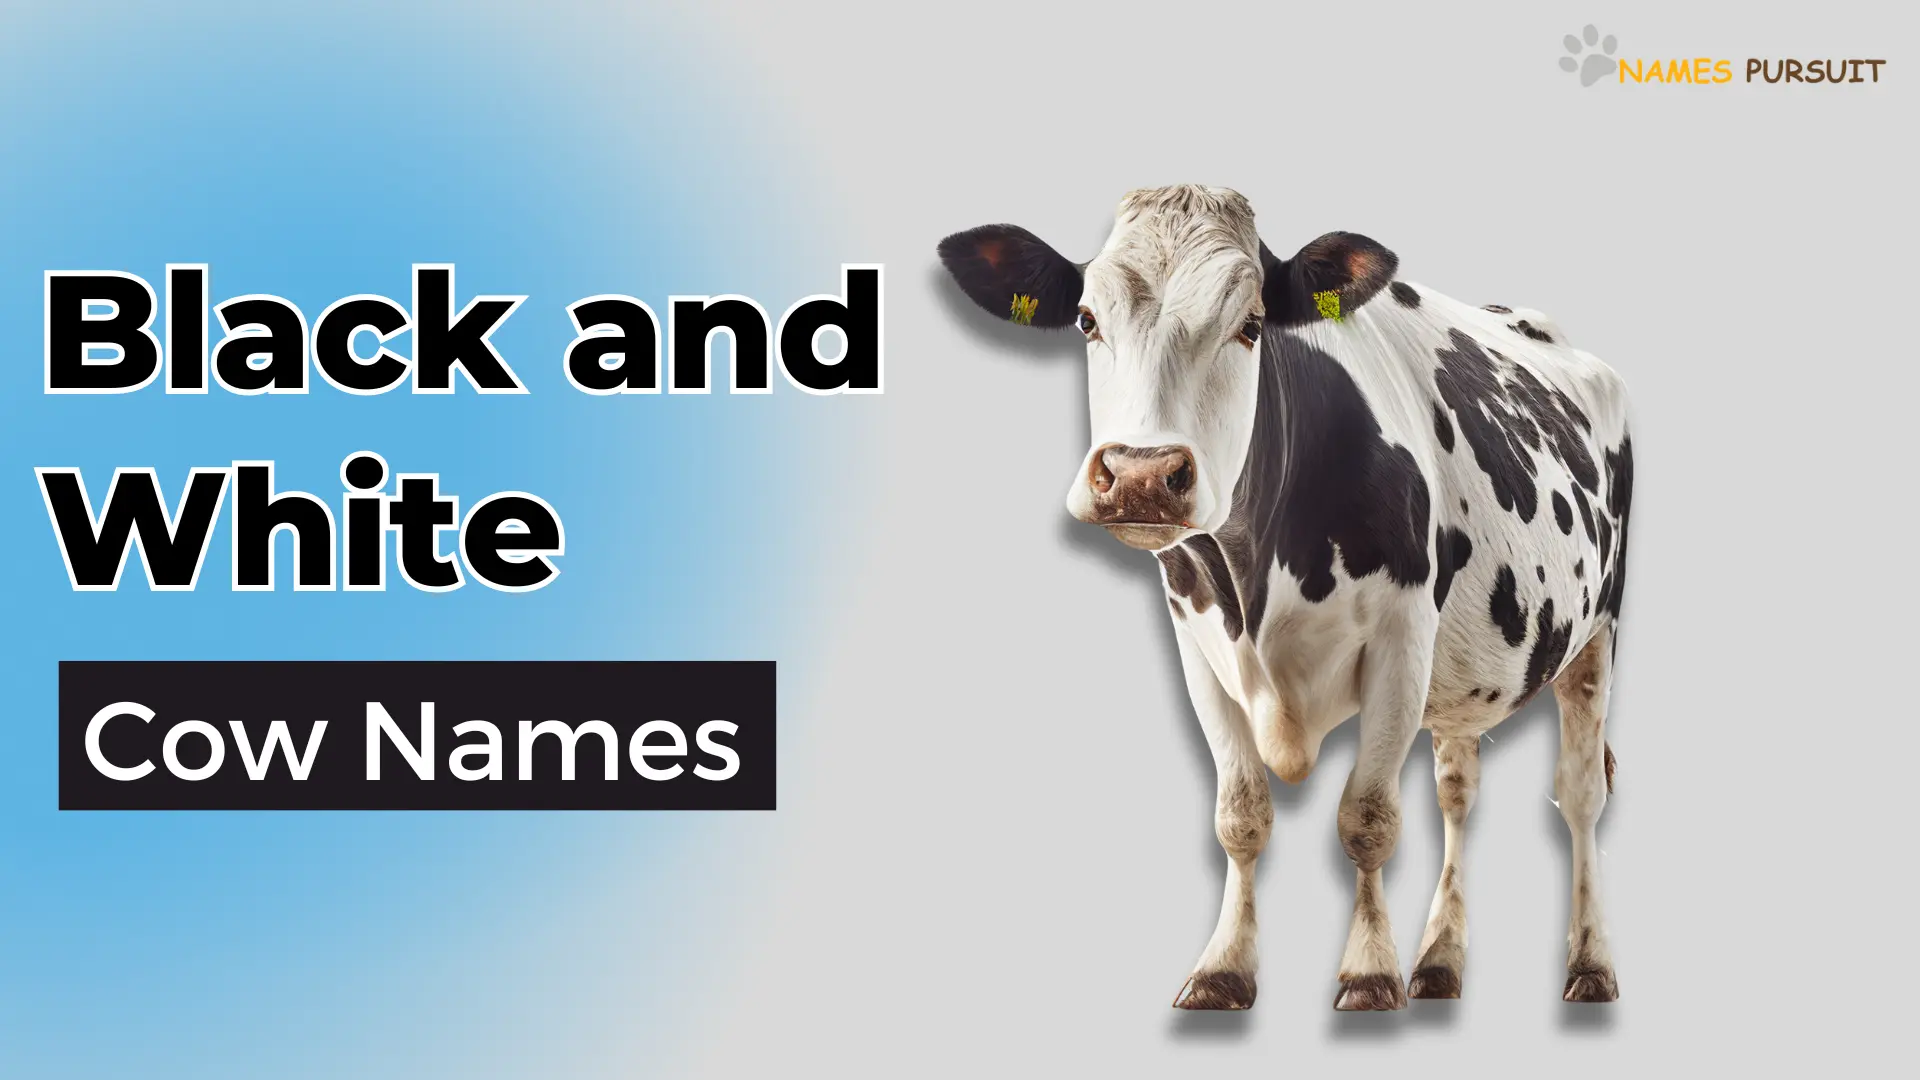 Black and White Cow Names